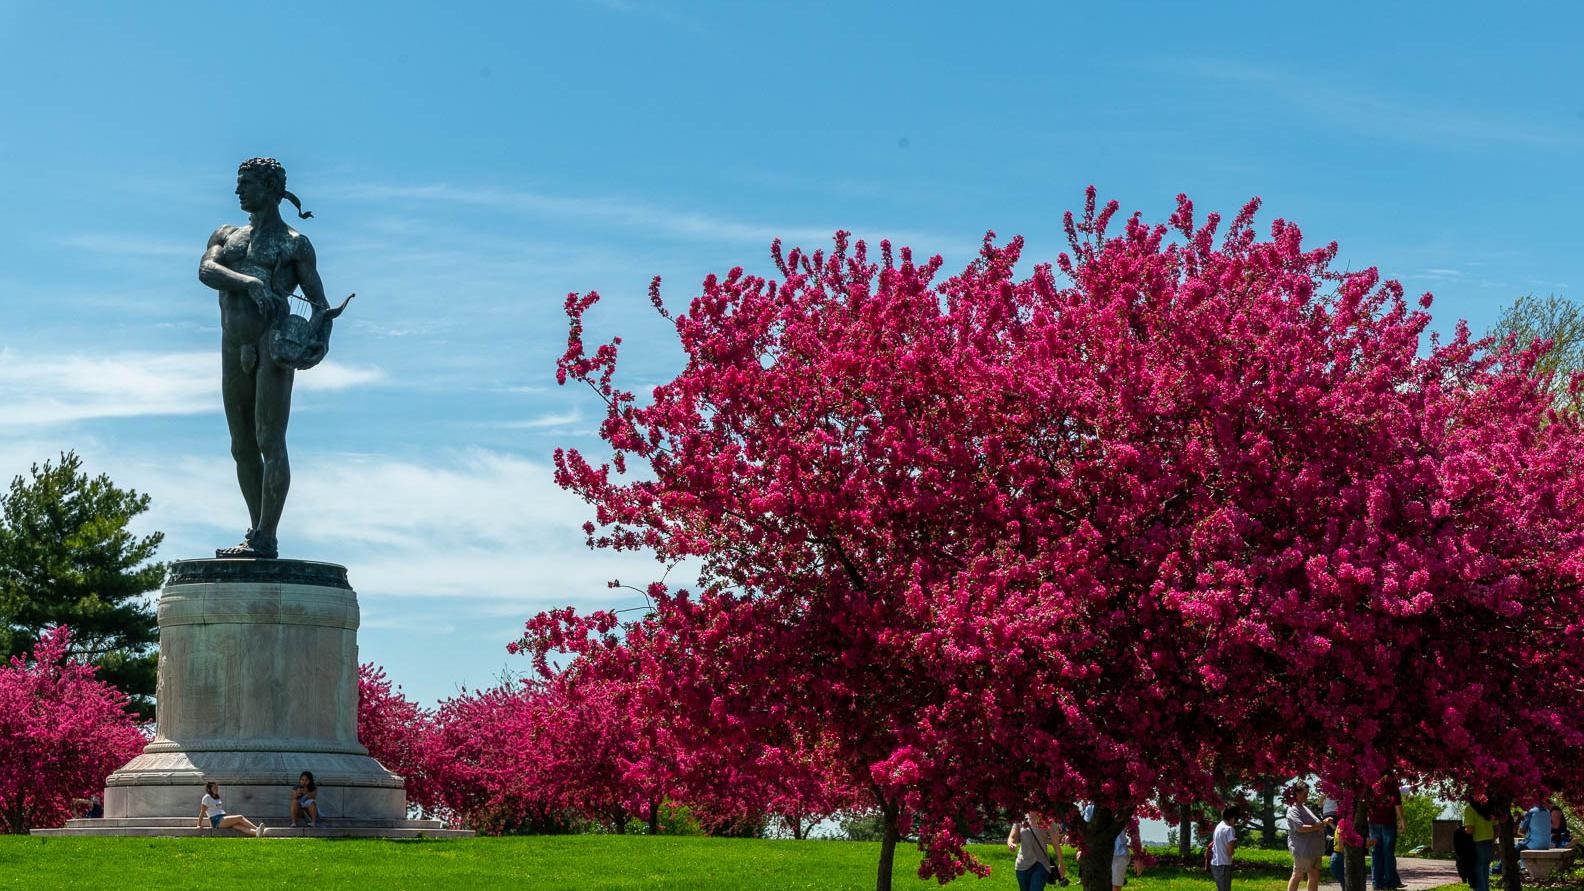 A picture of the Orpheus statue on a sunny day with blooming trees.